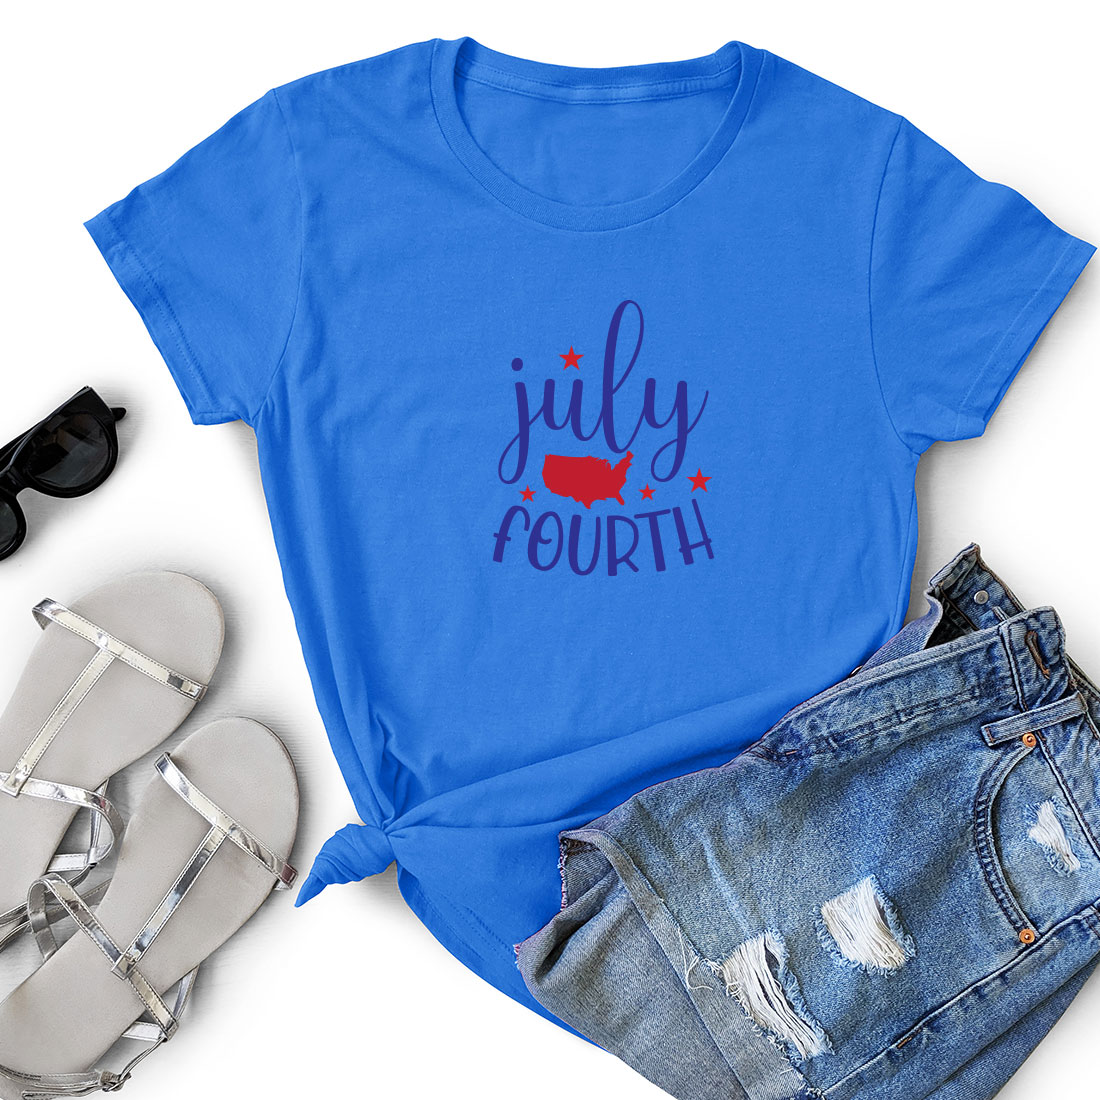 Blue shirt that says july fourth next to a pair of shorts.